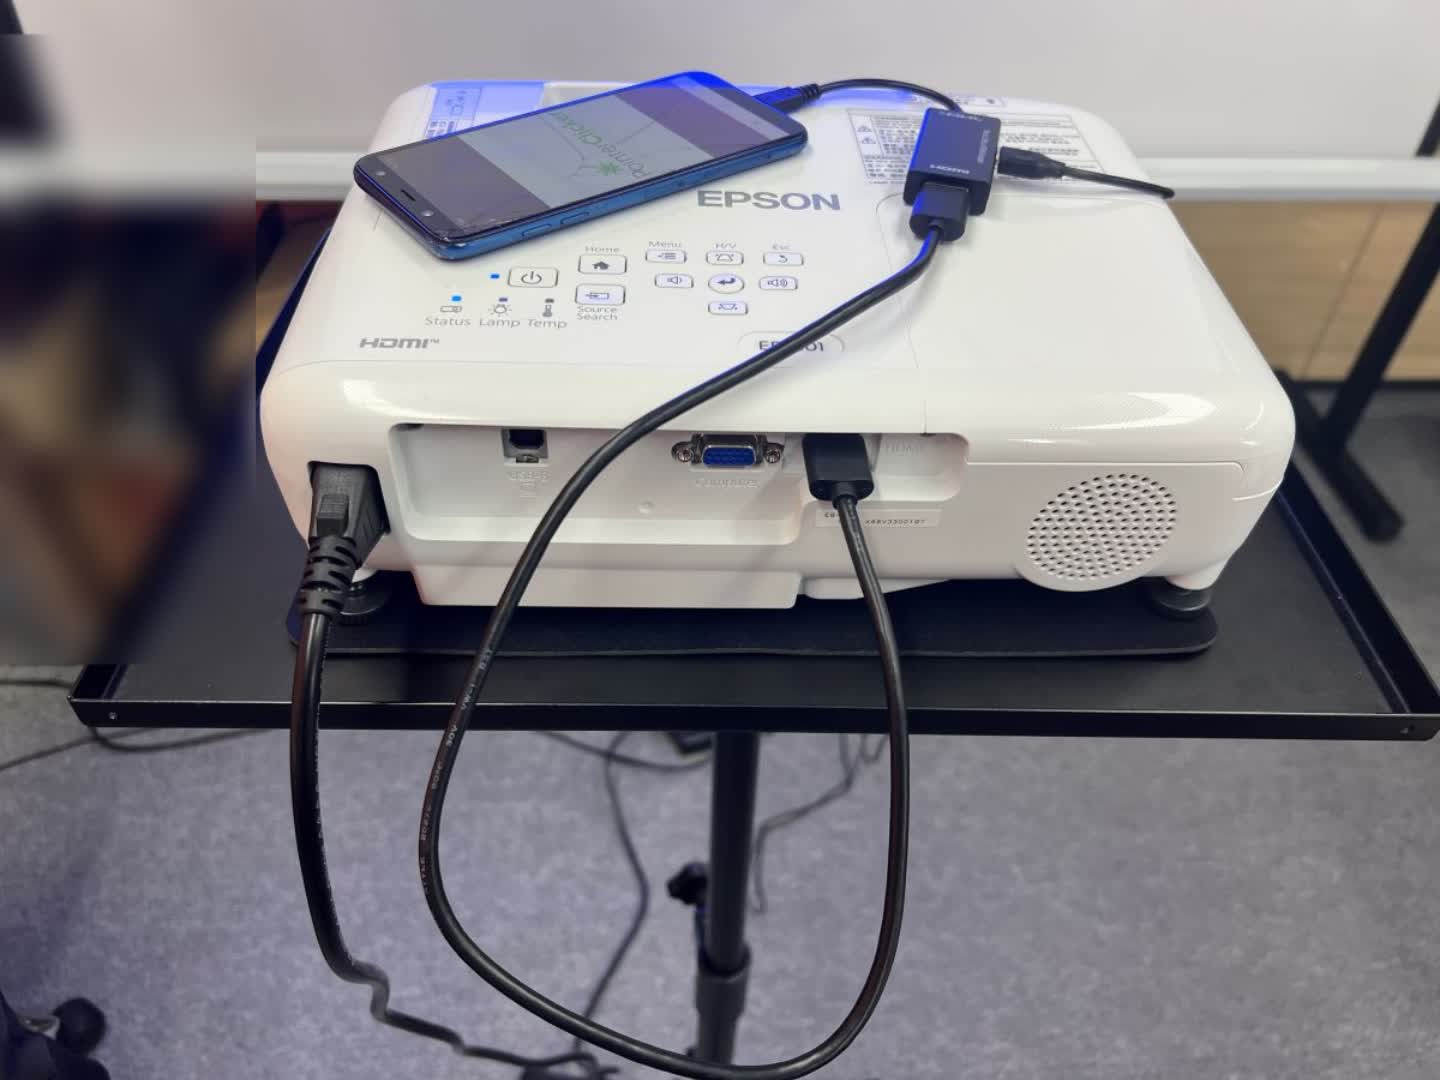 Epson projector is connected to Micro USB adapter with the Samsung Galaxy A6